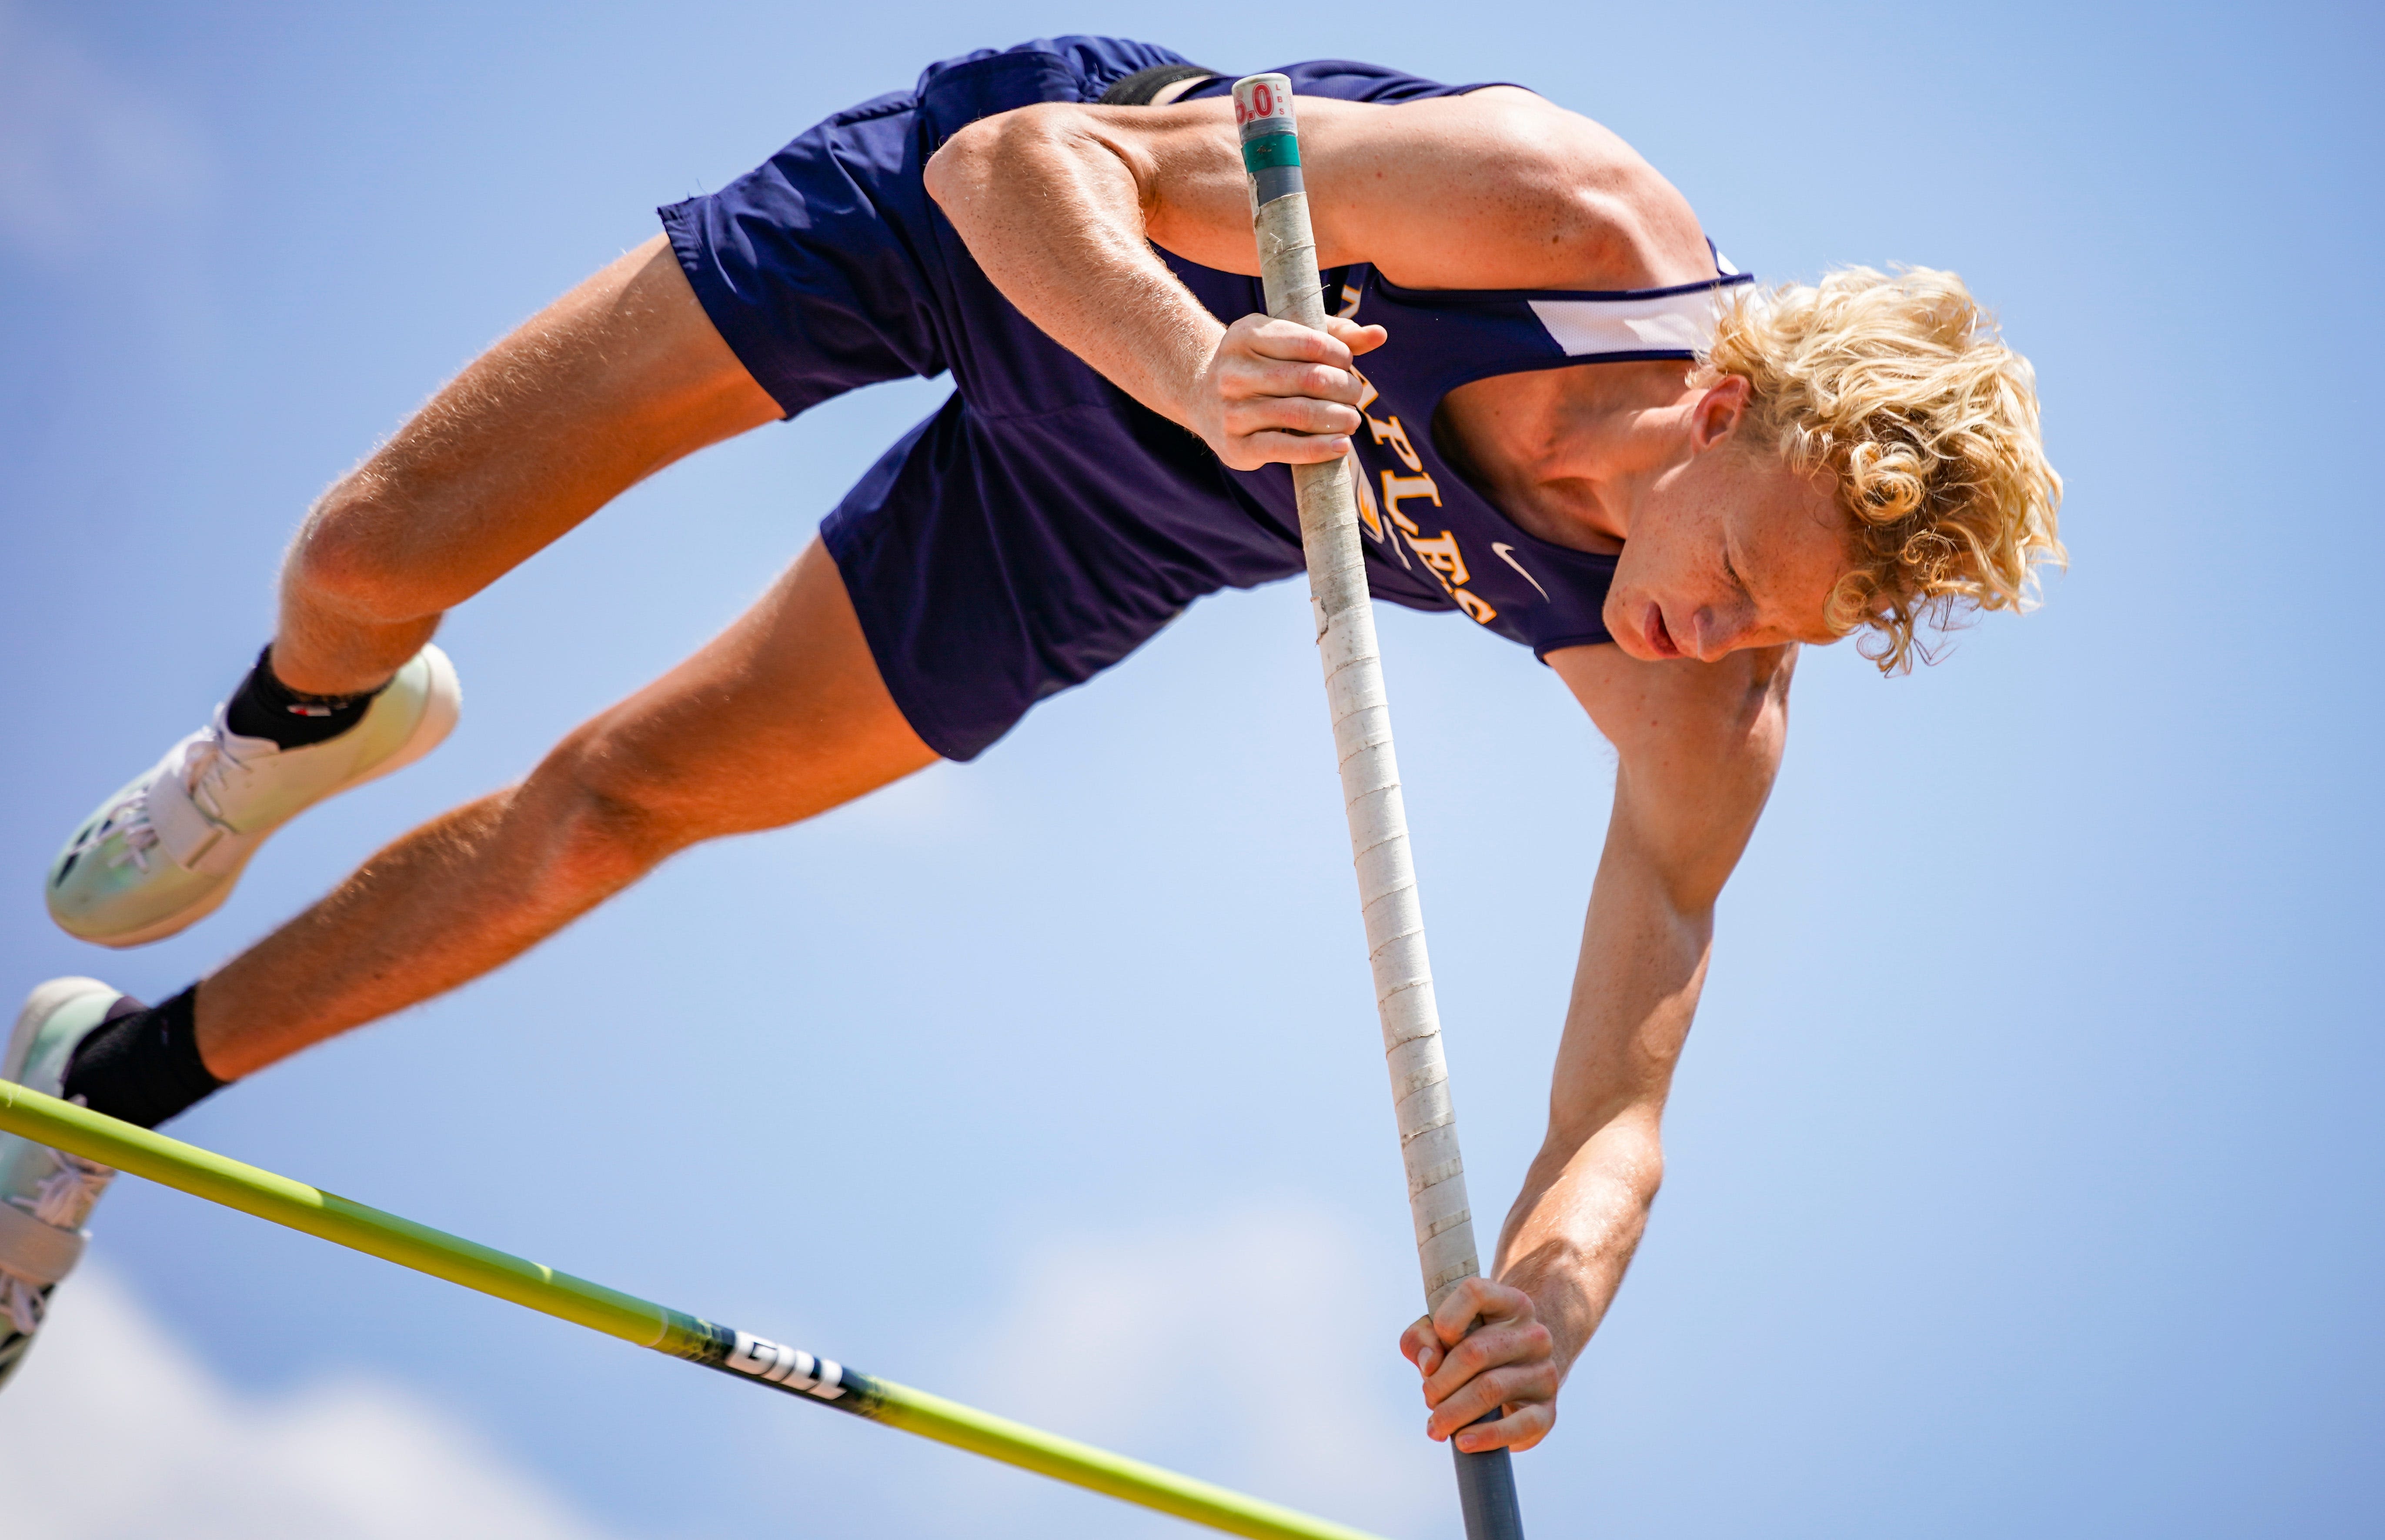 Setting a high bar: Naples pole vaulters Luther Mogelvang, Bates twins soaring to titles